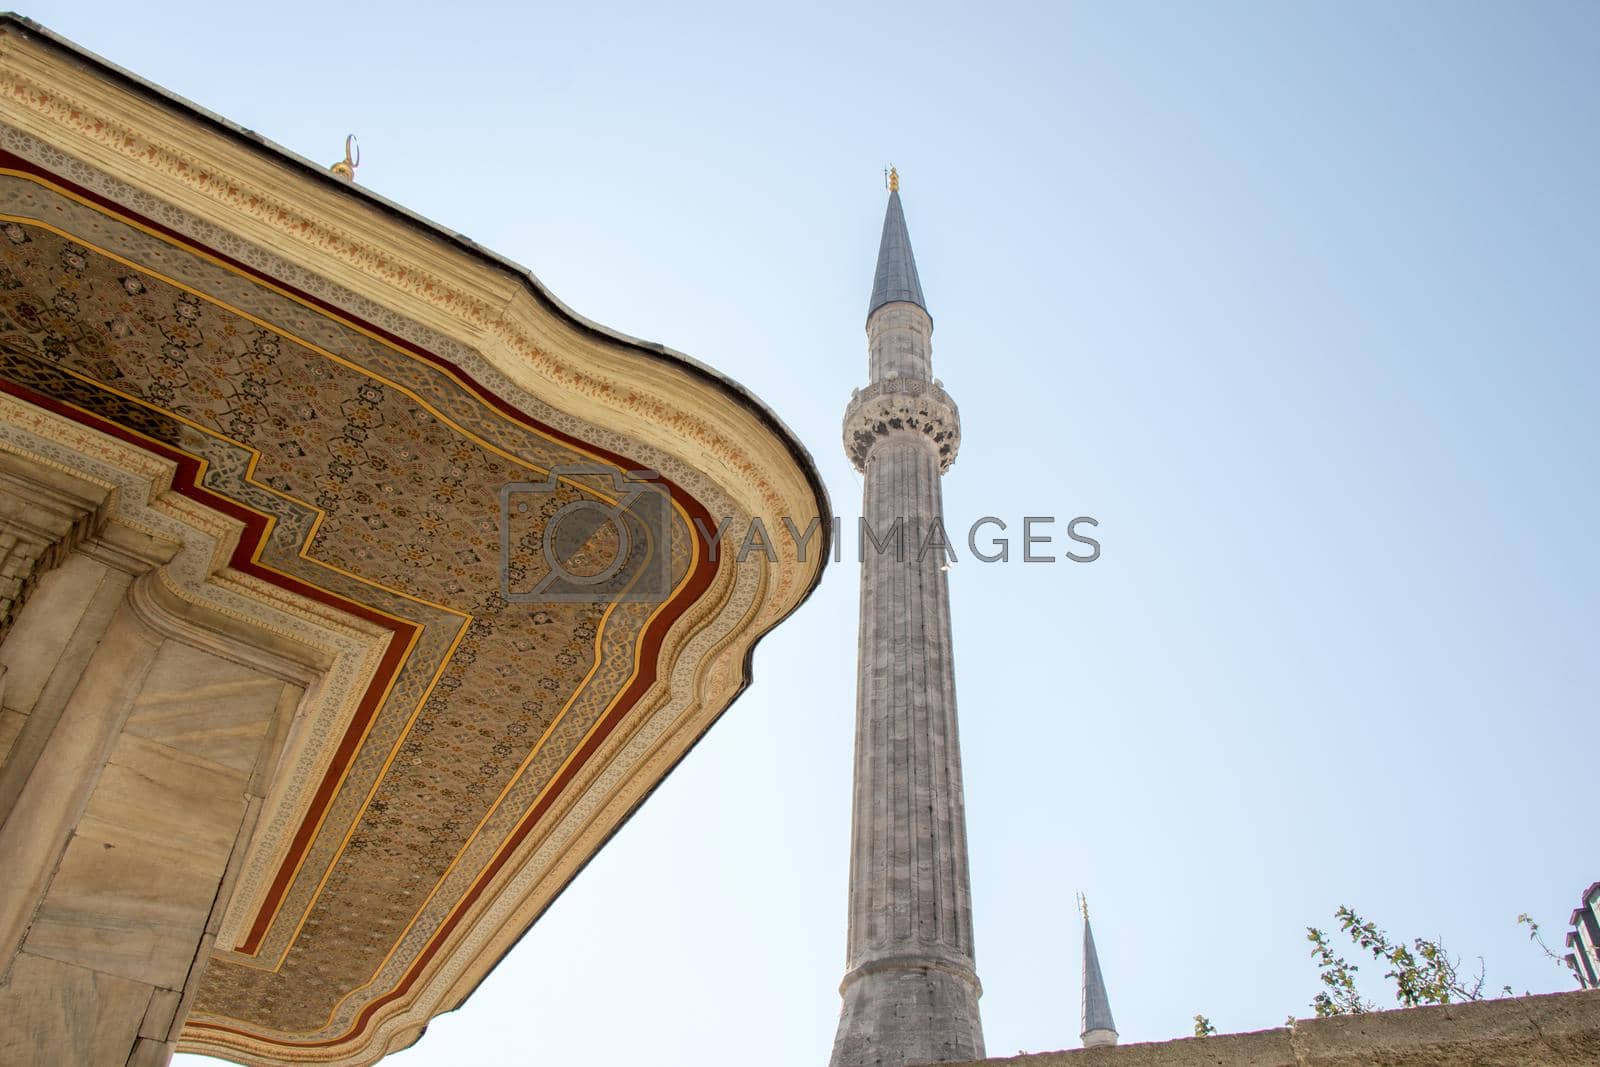 Royalty free image of Minaret of Ottoman Mosques in view by berkay